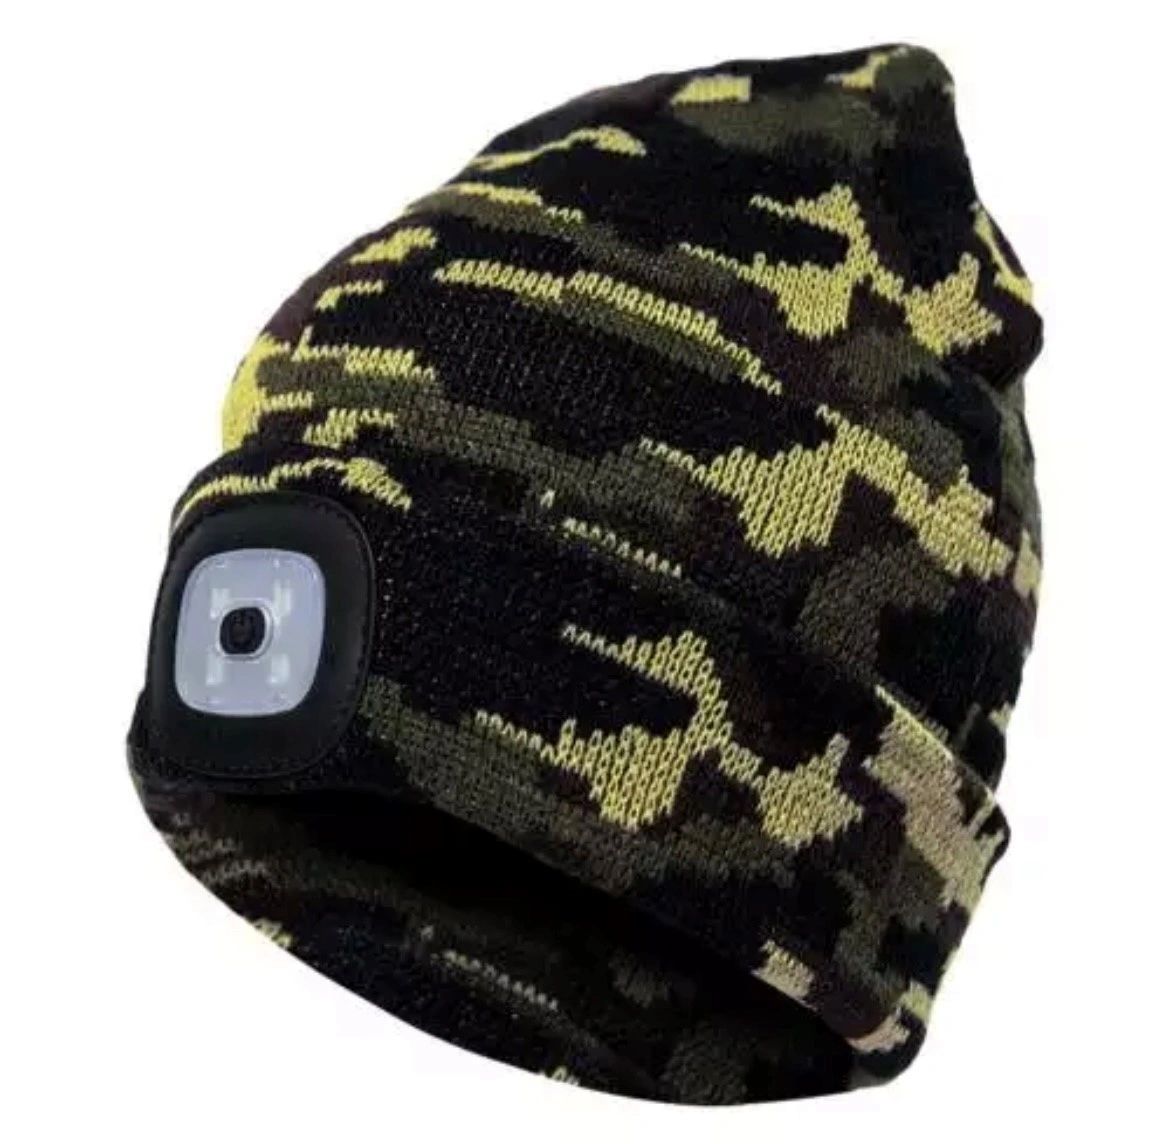 Beanie Hat with Torch